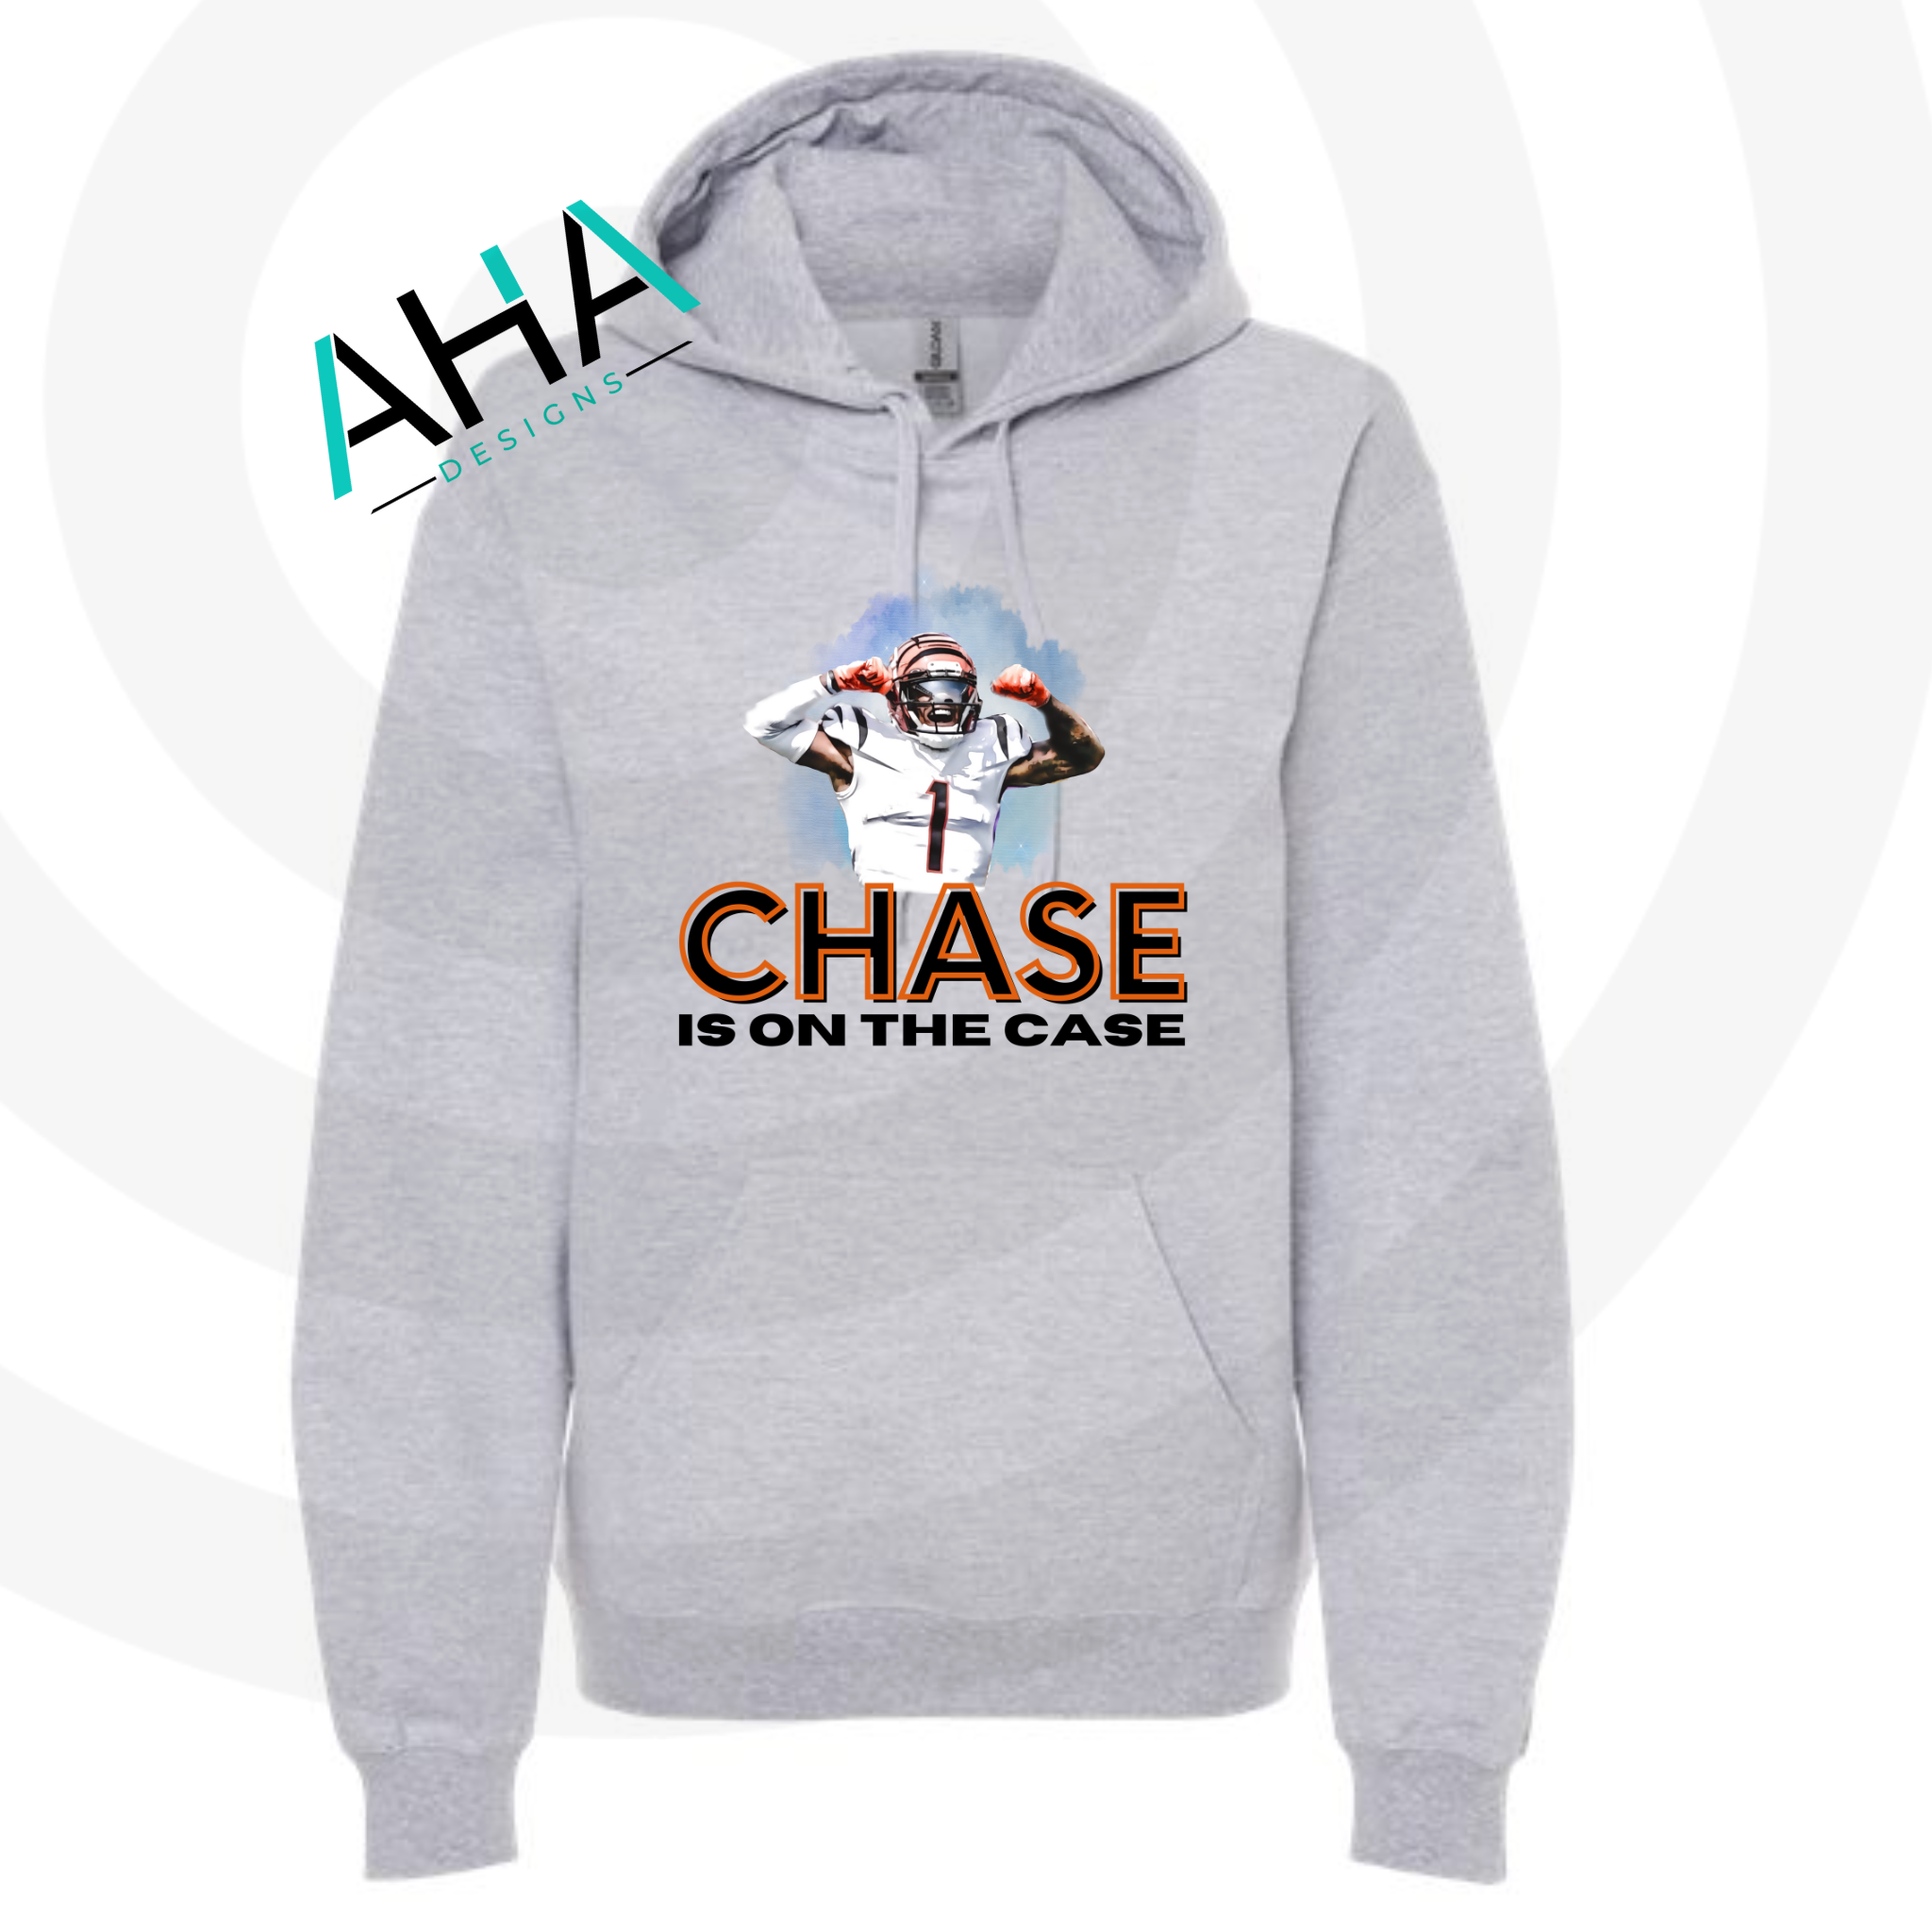 Chase is on the Case Hooded Sweatshirt